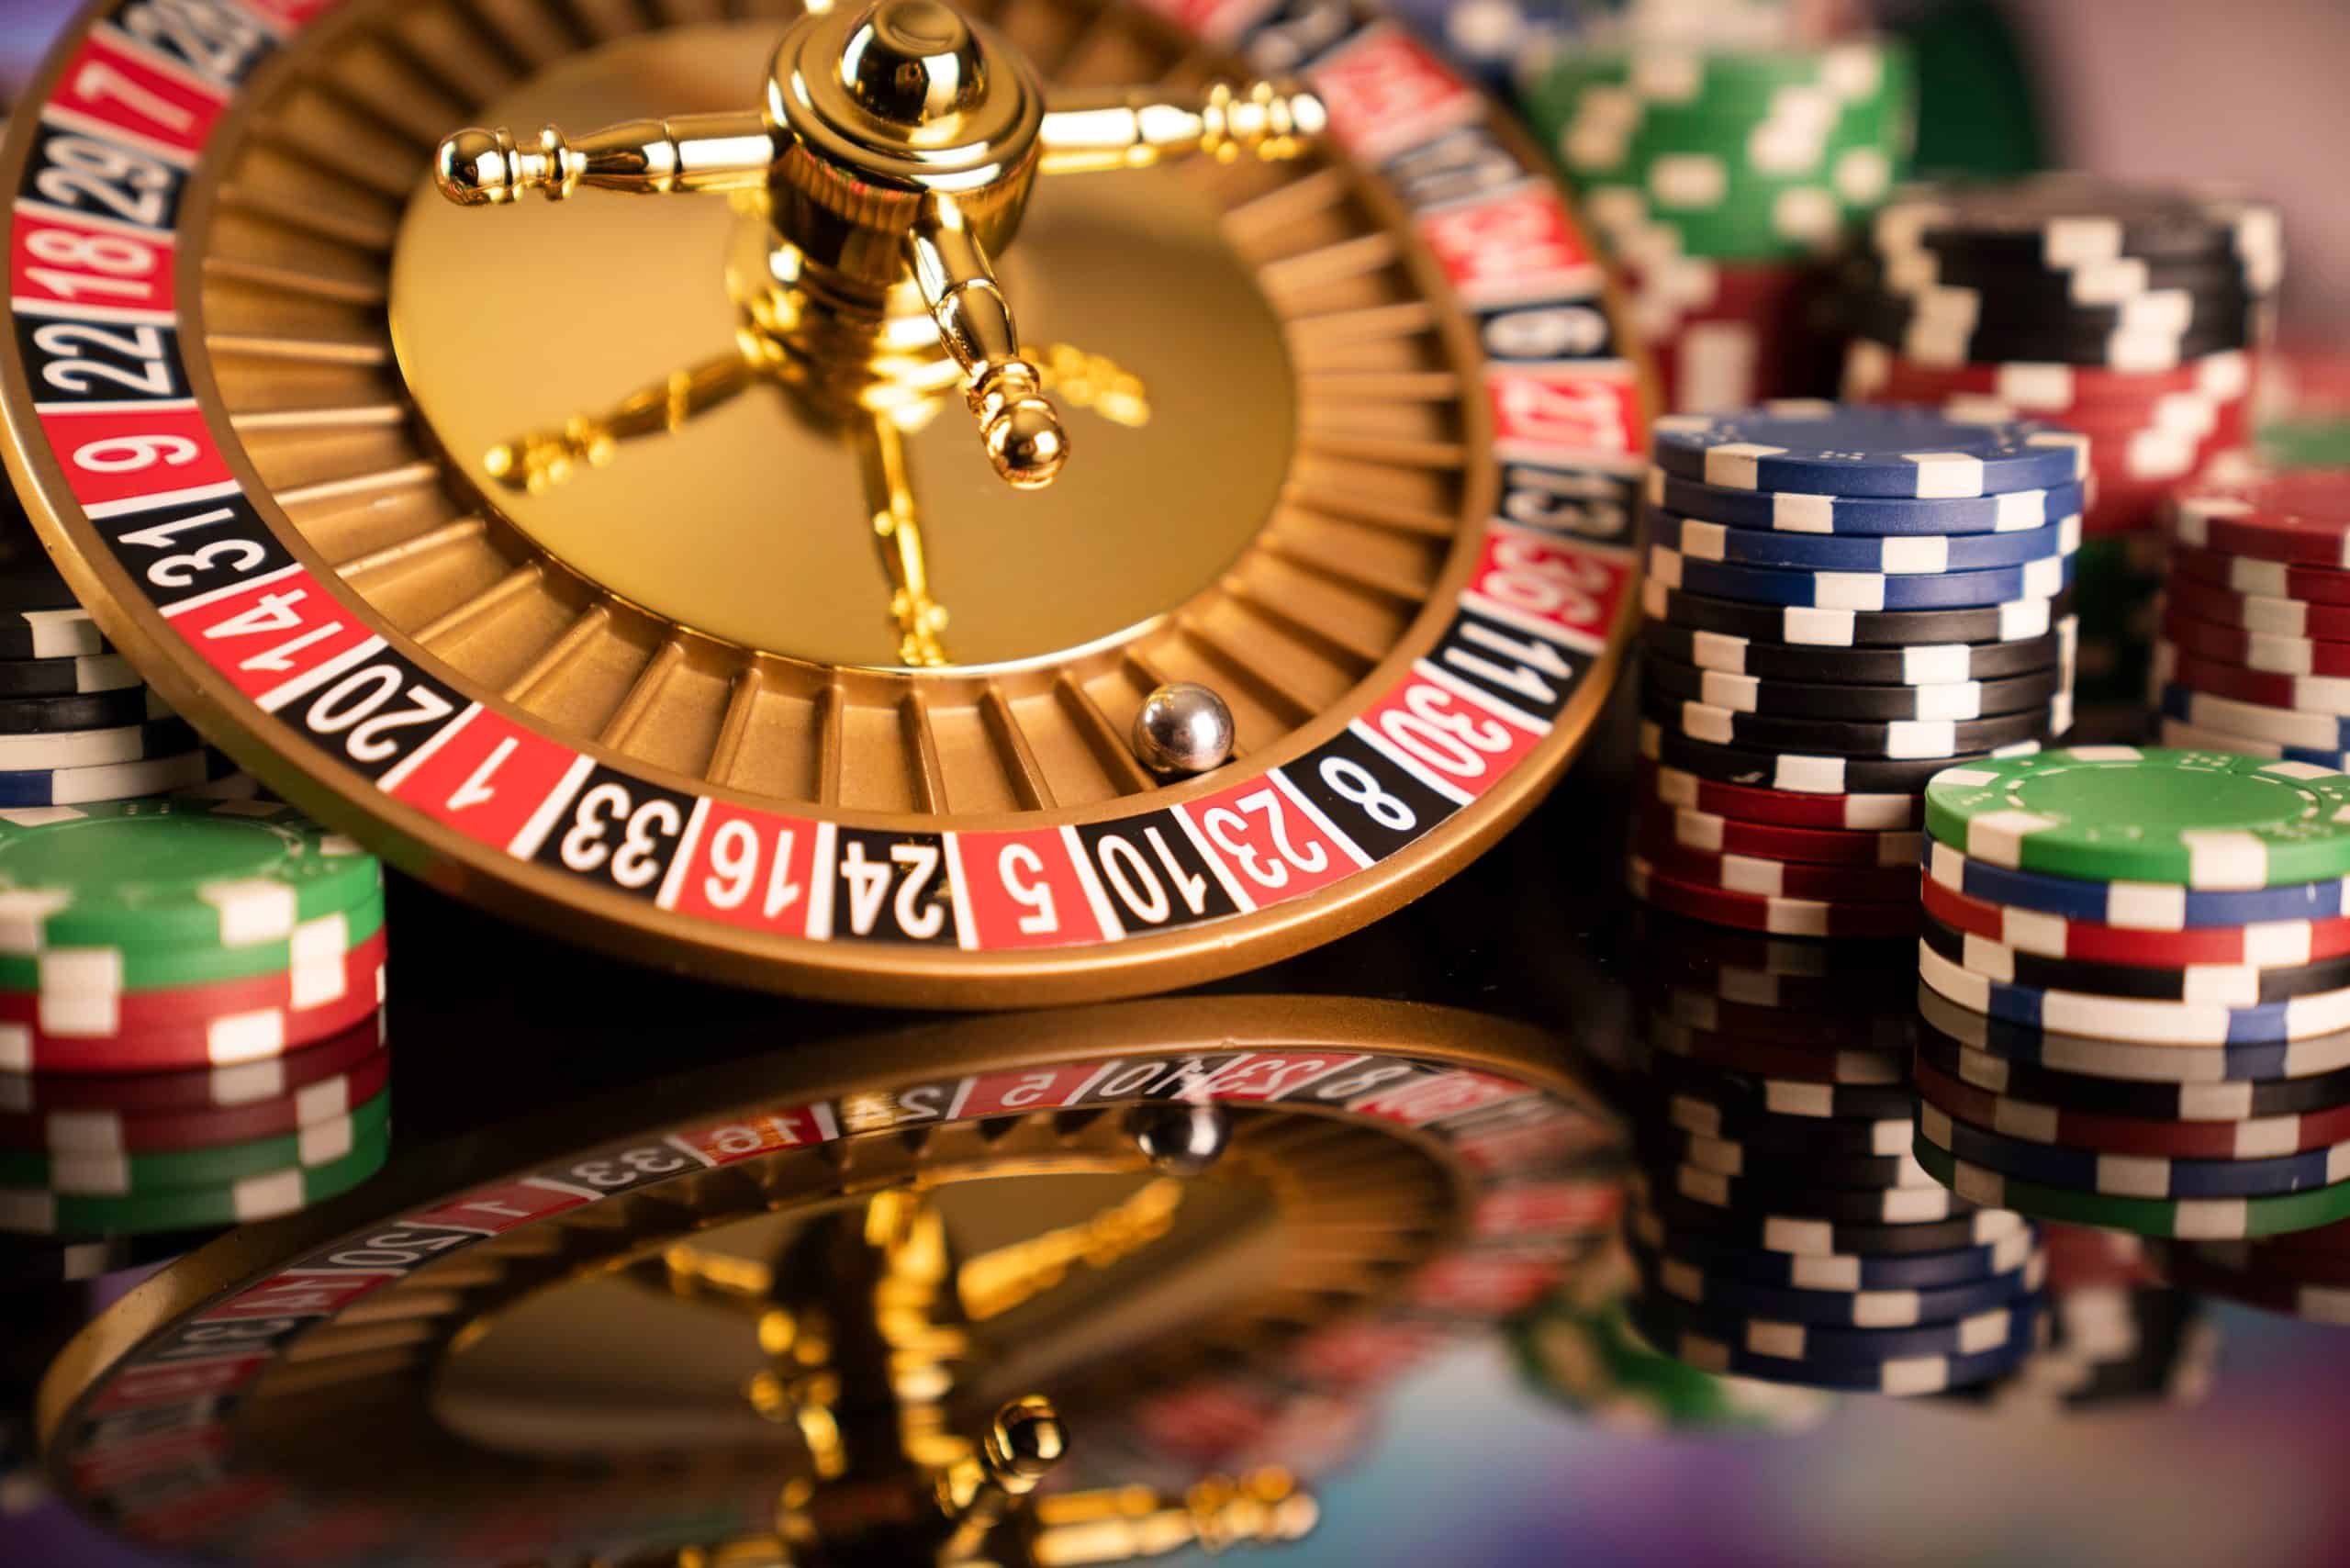 The Stuff About hrvatski online casino You Probably Hadn't Considered. And Really Should